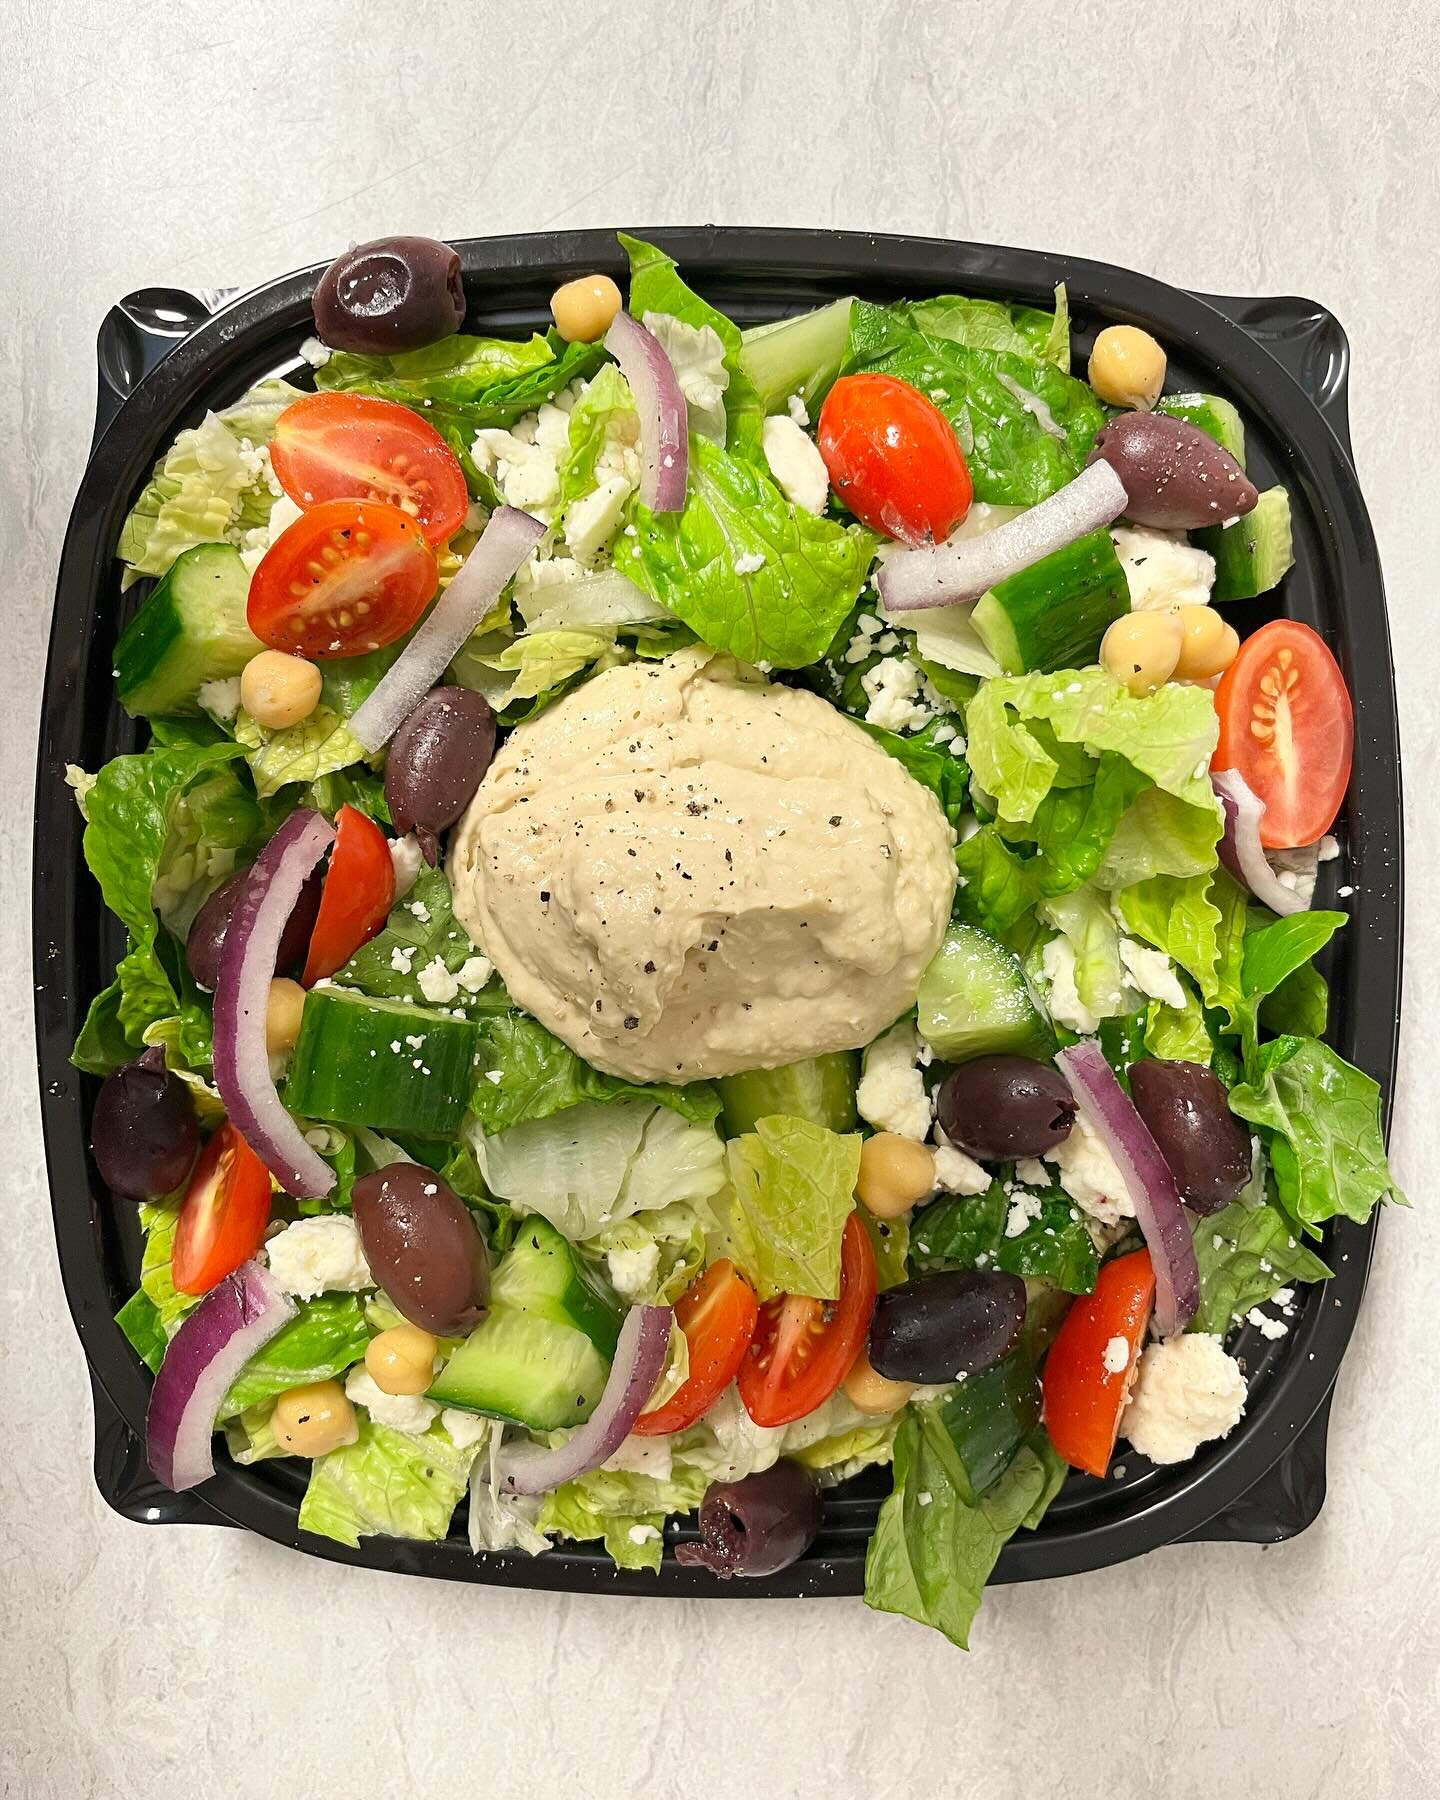 NEW SALAD ALERT!! 🥗

Our NEW Mediterranean salad is full of nutrient rich ingredients. 

It&rsquo;s made with Romaine lettuce, our own creamy hummus, feta cheese, Kalamata olives, chic peas, grape tomatoes, red onion and cucumbers. 

Top it with our